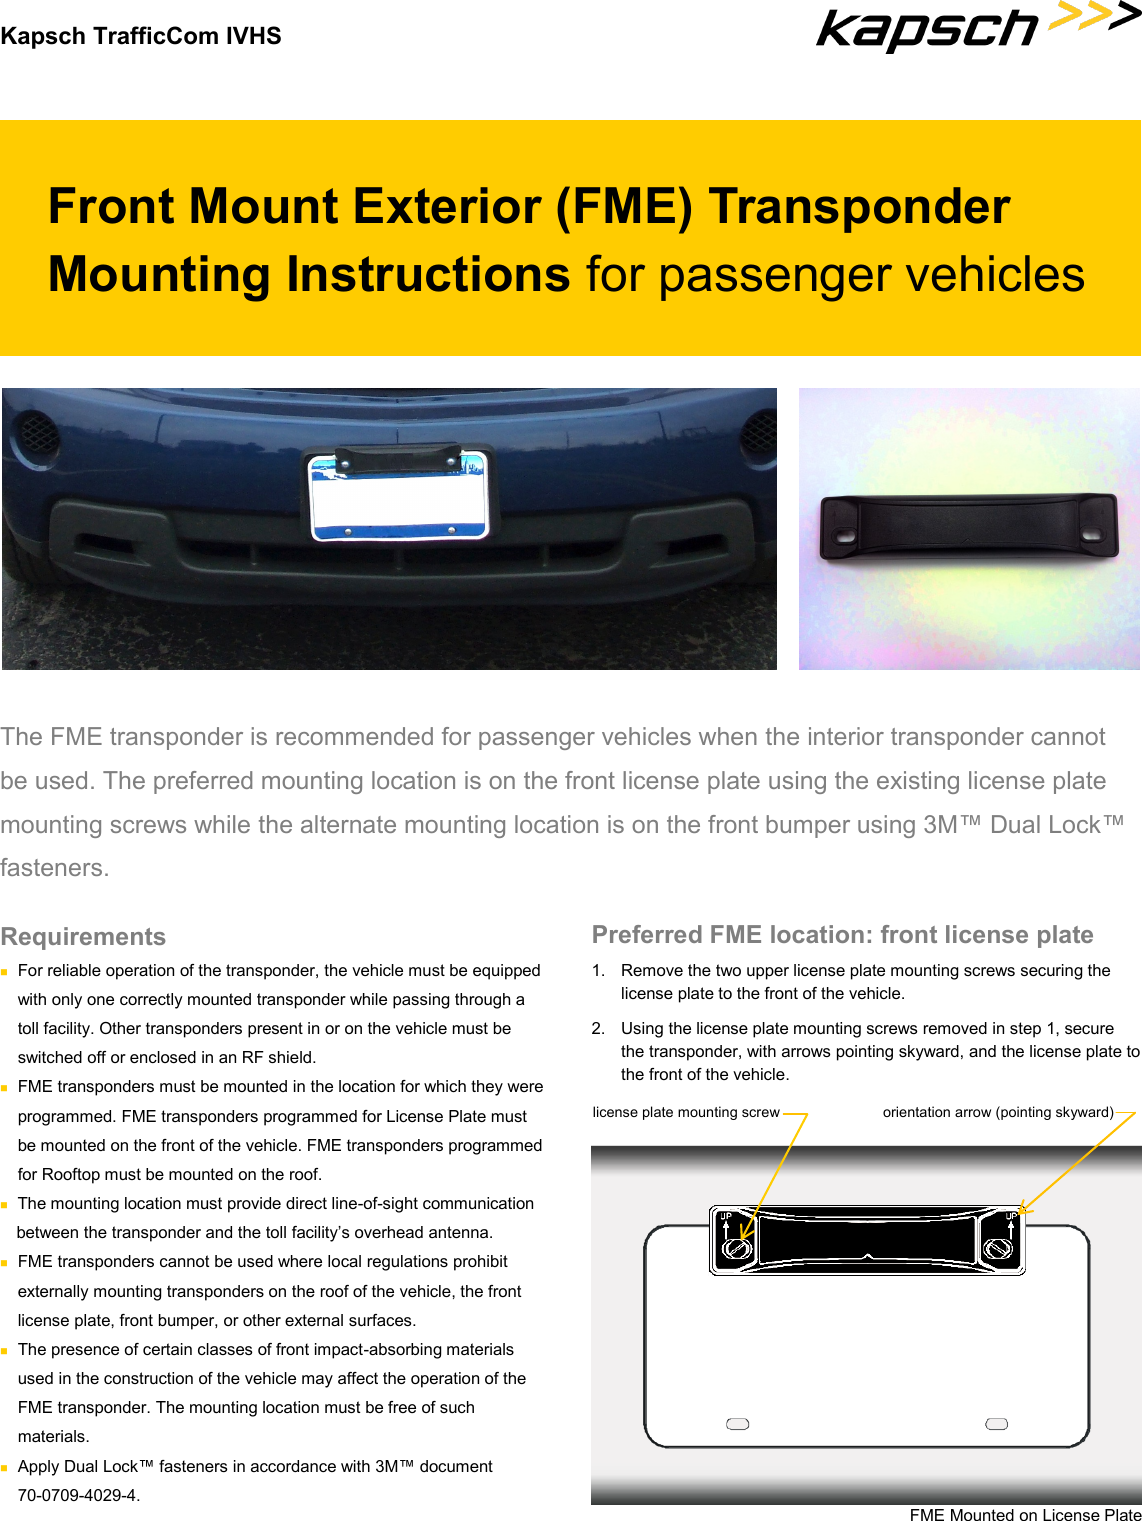 Kapsch TrafficCom IVHS Front Mount Exterior (FME) Transponder Mounting Instructions for passenger vehicles The FME transponder is recommended for passenger vehicles when the interior transponder cannot be used. The preferred mounting location is on the front license plate using the existing license plate mounting screws while the alternate mounting location is on the front bumper using 3M™ Dual Lock™ fasteners.  Preferred FME location: front license plate 1.  Remove the two upper license plate mounting screws securing the license plate to the front of the vehicle. 2.  Using the license plate mounting screws removed in step 1, secure the transponder, with arrows pointing skyward, and the license plate to the front of the vehicle. Requirements  For reliable operation of the transponder, the vehicle must be equipped with only one correctly mounted transponder while passing through a toll facility. Other transponders present in or on the vehicle must be switched off or enclosed in an RF shield.  FME transponders must be mounted in the location for which they were  programmed. FME transponders programmed for License Plate must be mounted on the front of the vehicle. FME transponders programmed for Rooftop must be mounted on the roof.  The mounting location must provide direct line-of-sight communication between the transponder and the toll facility’s overhead antenna.  FME transponders cannot be used where local regulations prohibit externally mounting transponders on the roof of the vehicle, the front  license plate, front bumper, or other external surfaces.  The presence of certain classes of front impact-absorbing materials used in the construction of the vehicle may affect the operation of the FME transponder. The mounting location must be free of such  materials.  Apply Dual Lock™ fasteners in accordance with 3M™ document  70-0709-4029-4. license plate mounting screw  orientation arrow (pointing skyward) FME Mounted on License Plate 